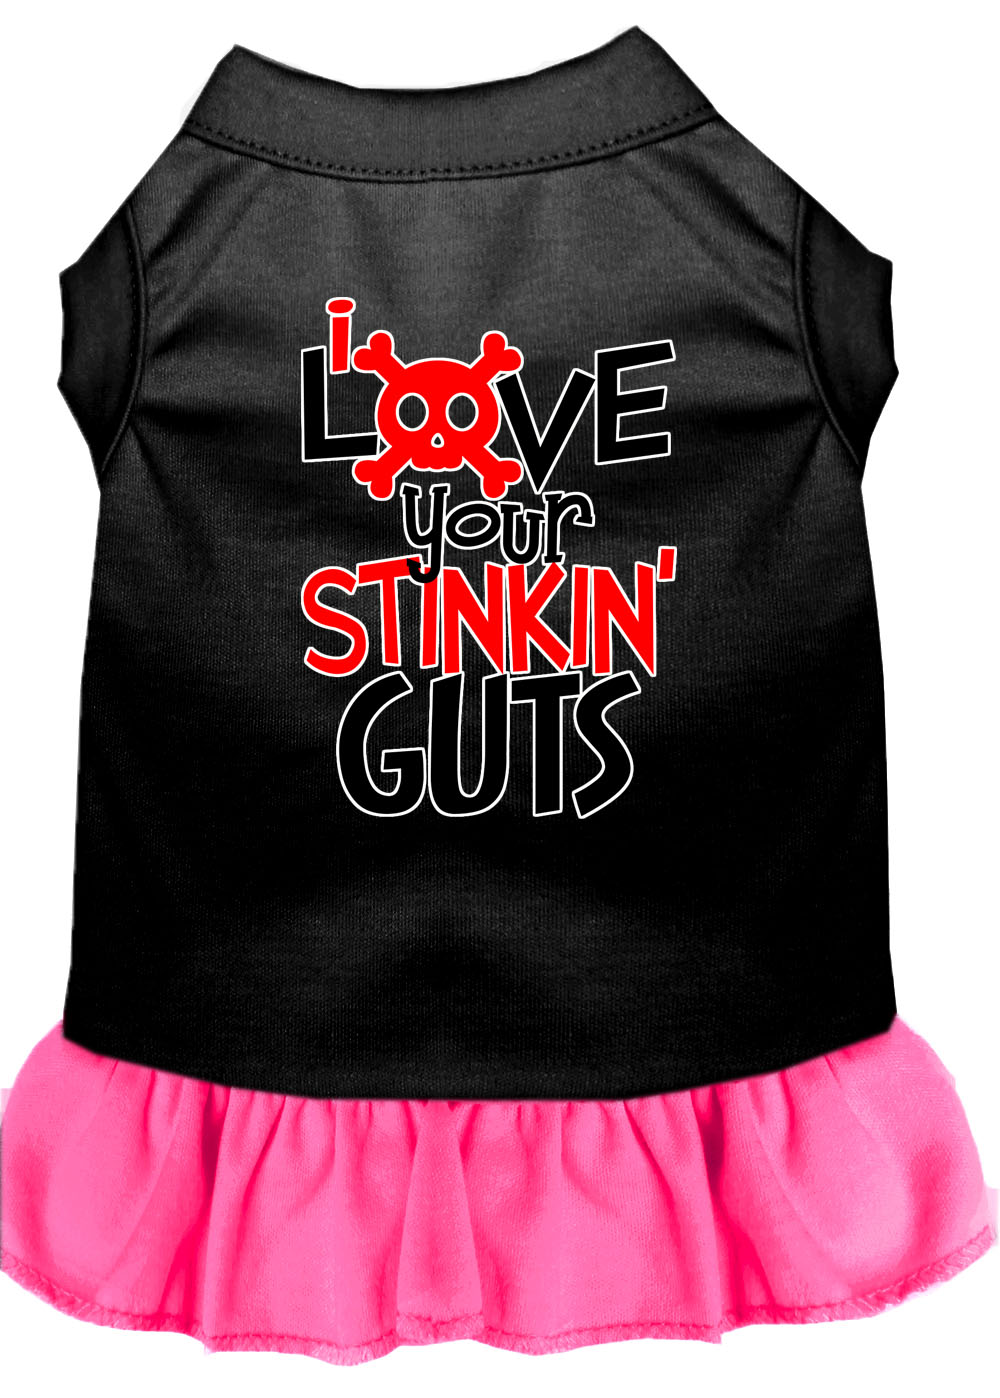 Love your Stinkin Guts Screen Print Dog Dress Black with Bright Pink Med